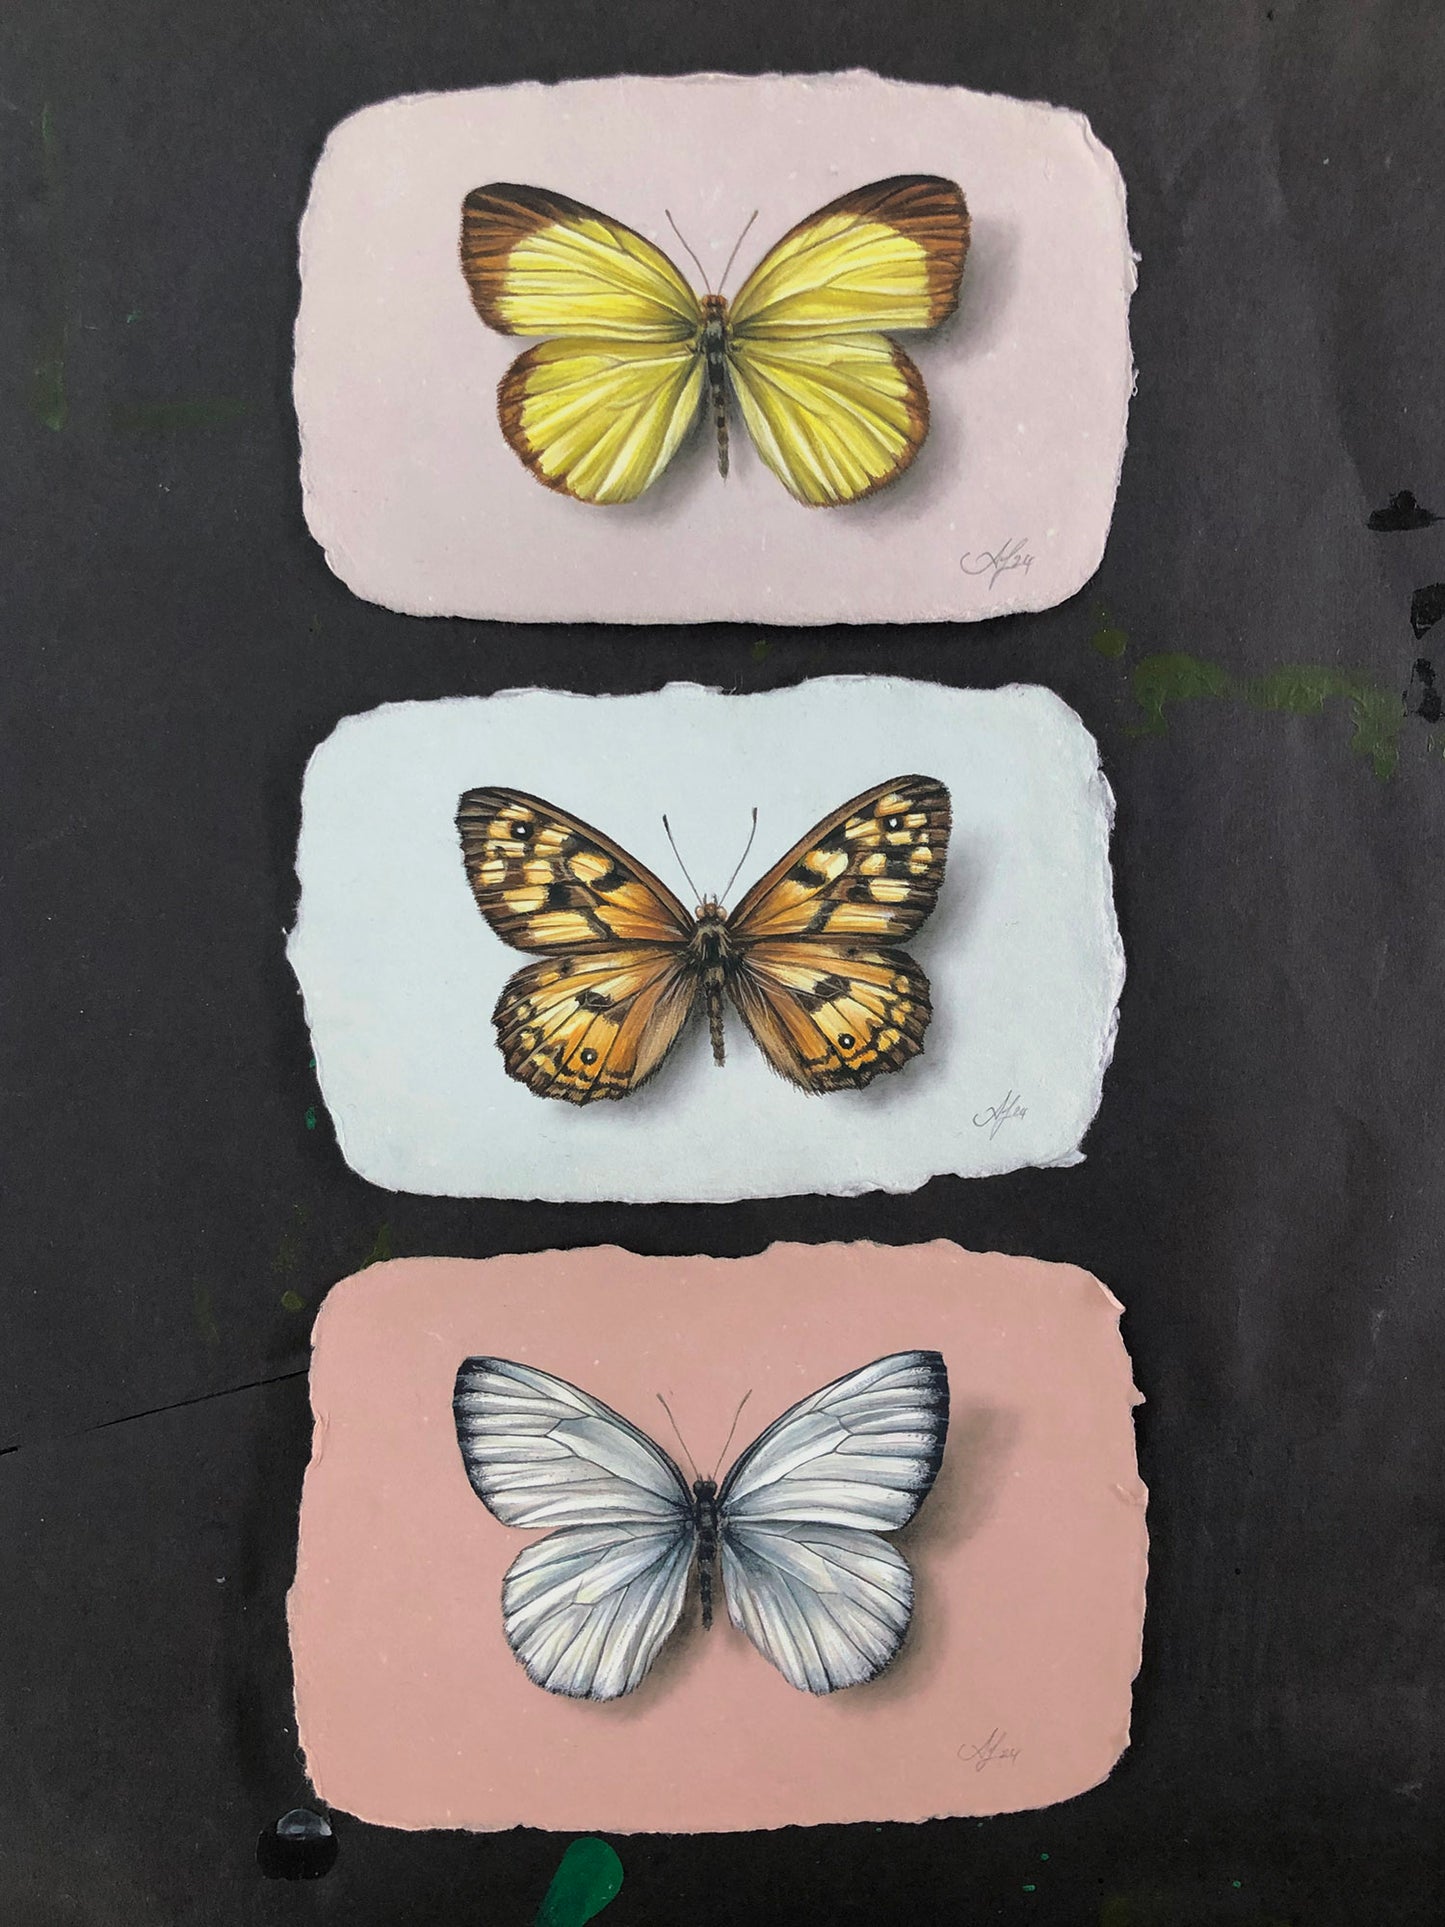 Butterfly on Handmade Paper #10 - 5.5 x 3.5"